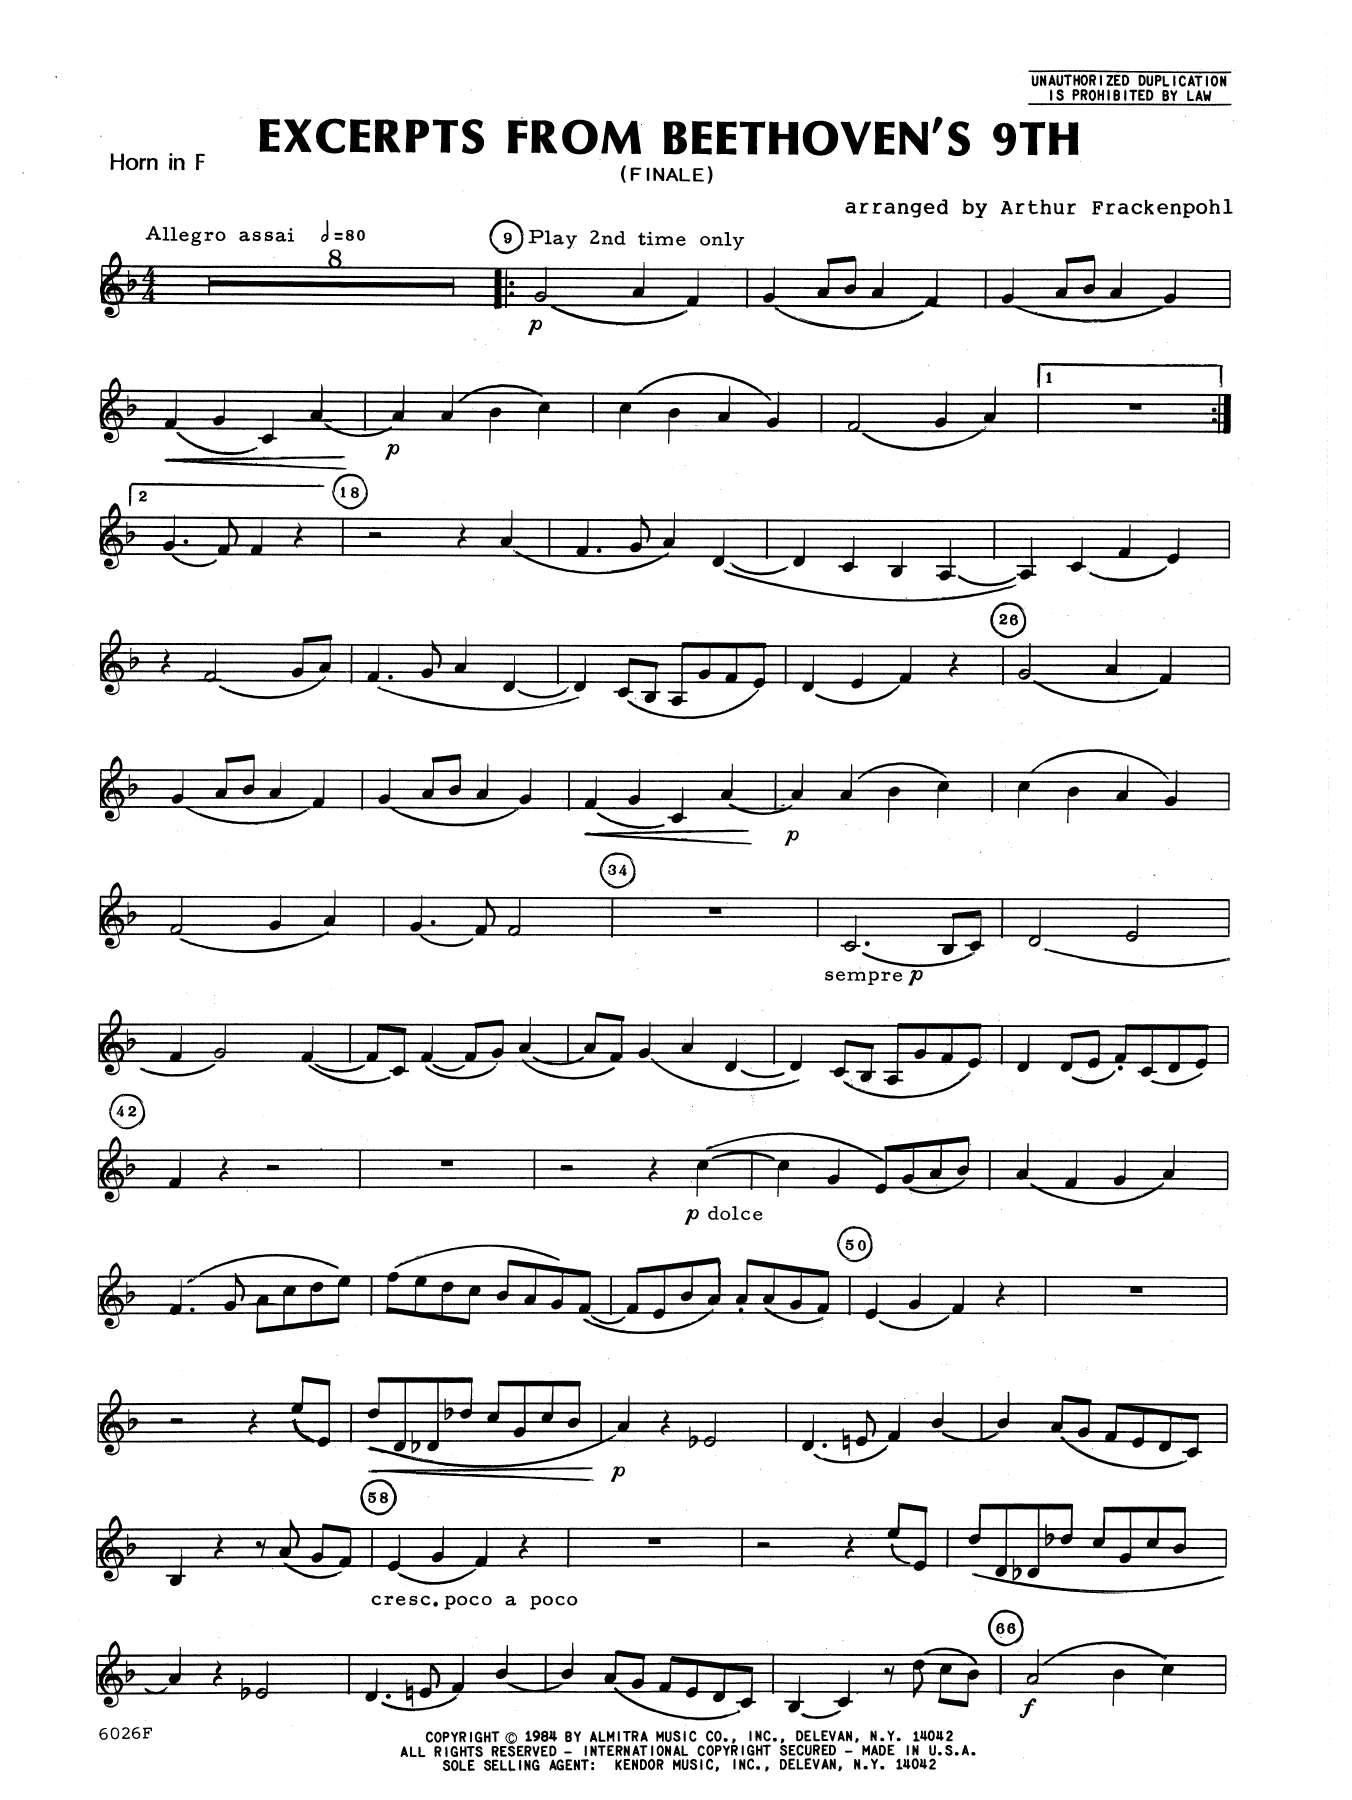 Download Arthur Frackenpohl Excerpts From Beethoven's 9th - Horn in Sheet Music